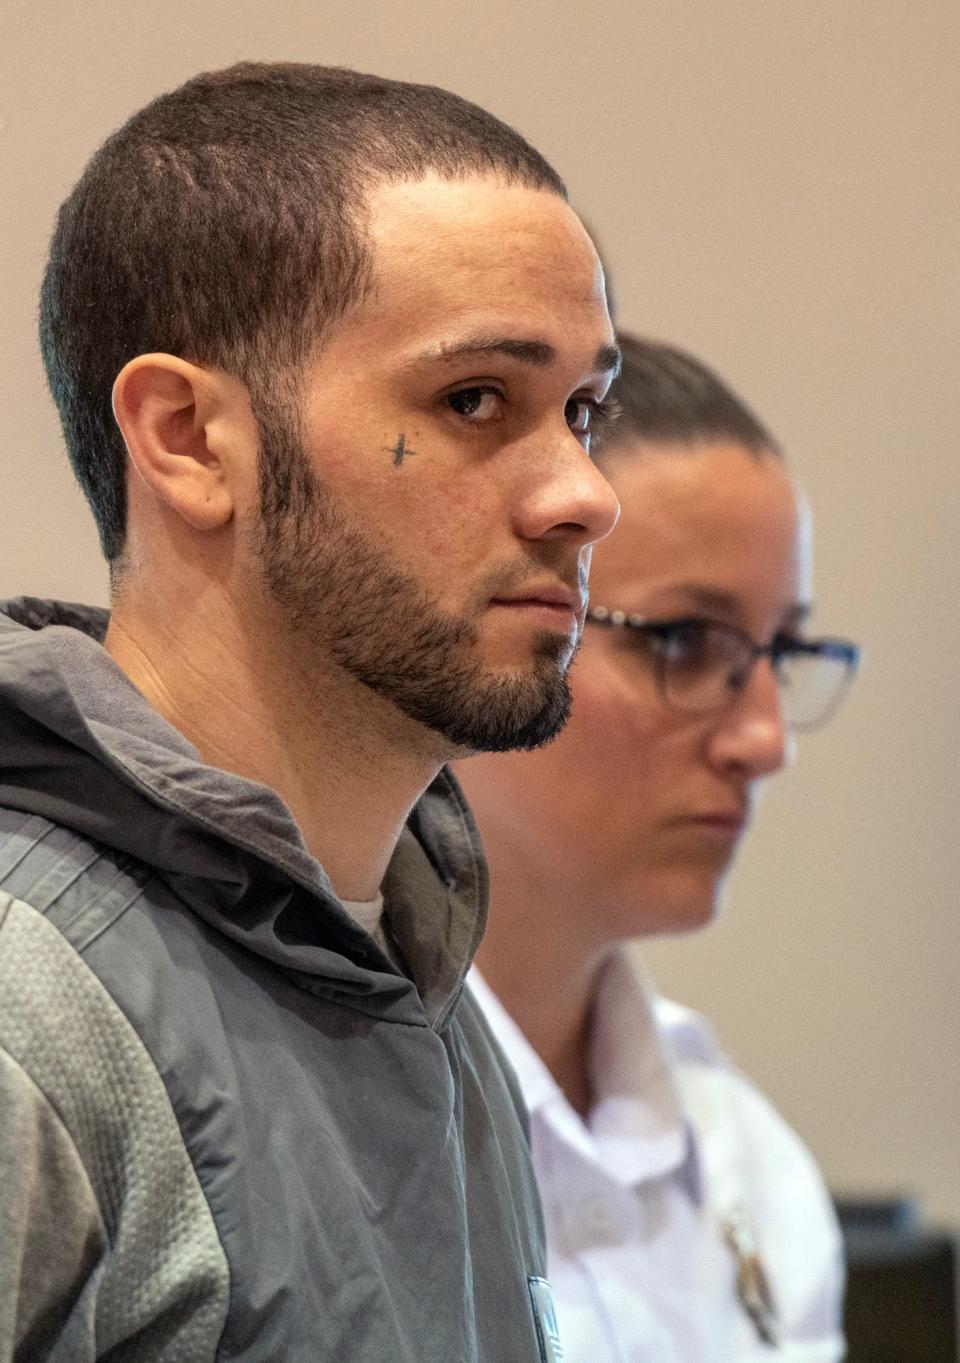 Wilbert I. Nieves, charged with murdering Franklin Mane, is arraigned in Leominster District Court Thursday.